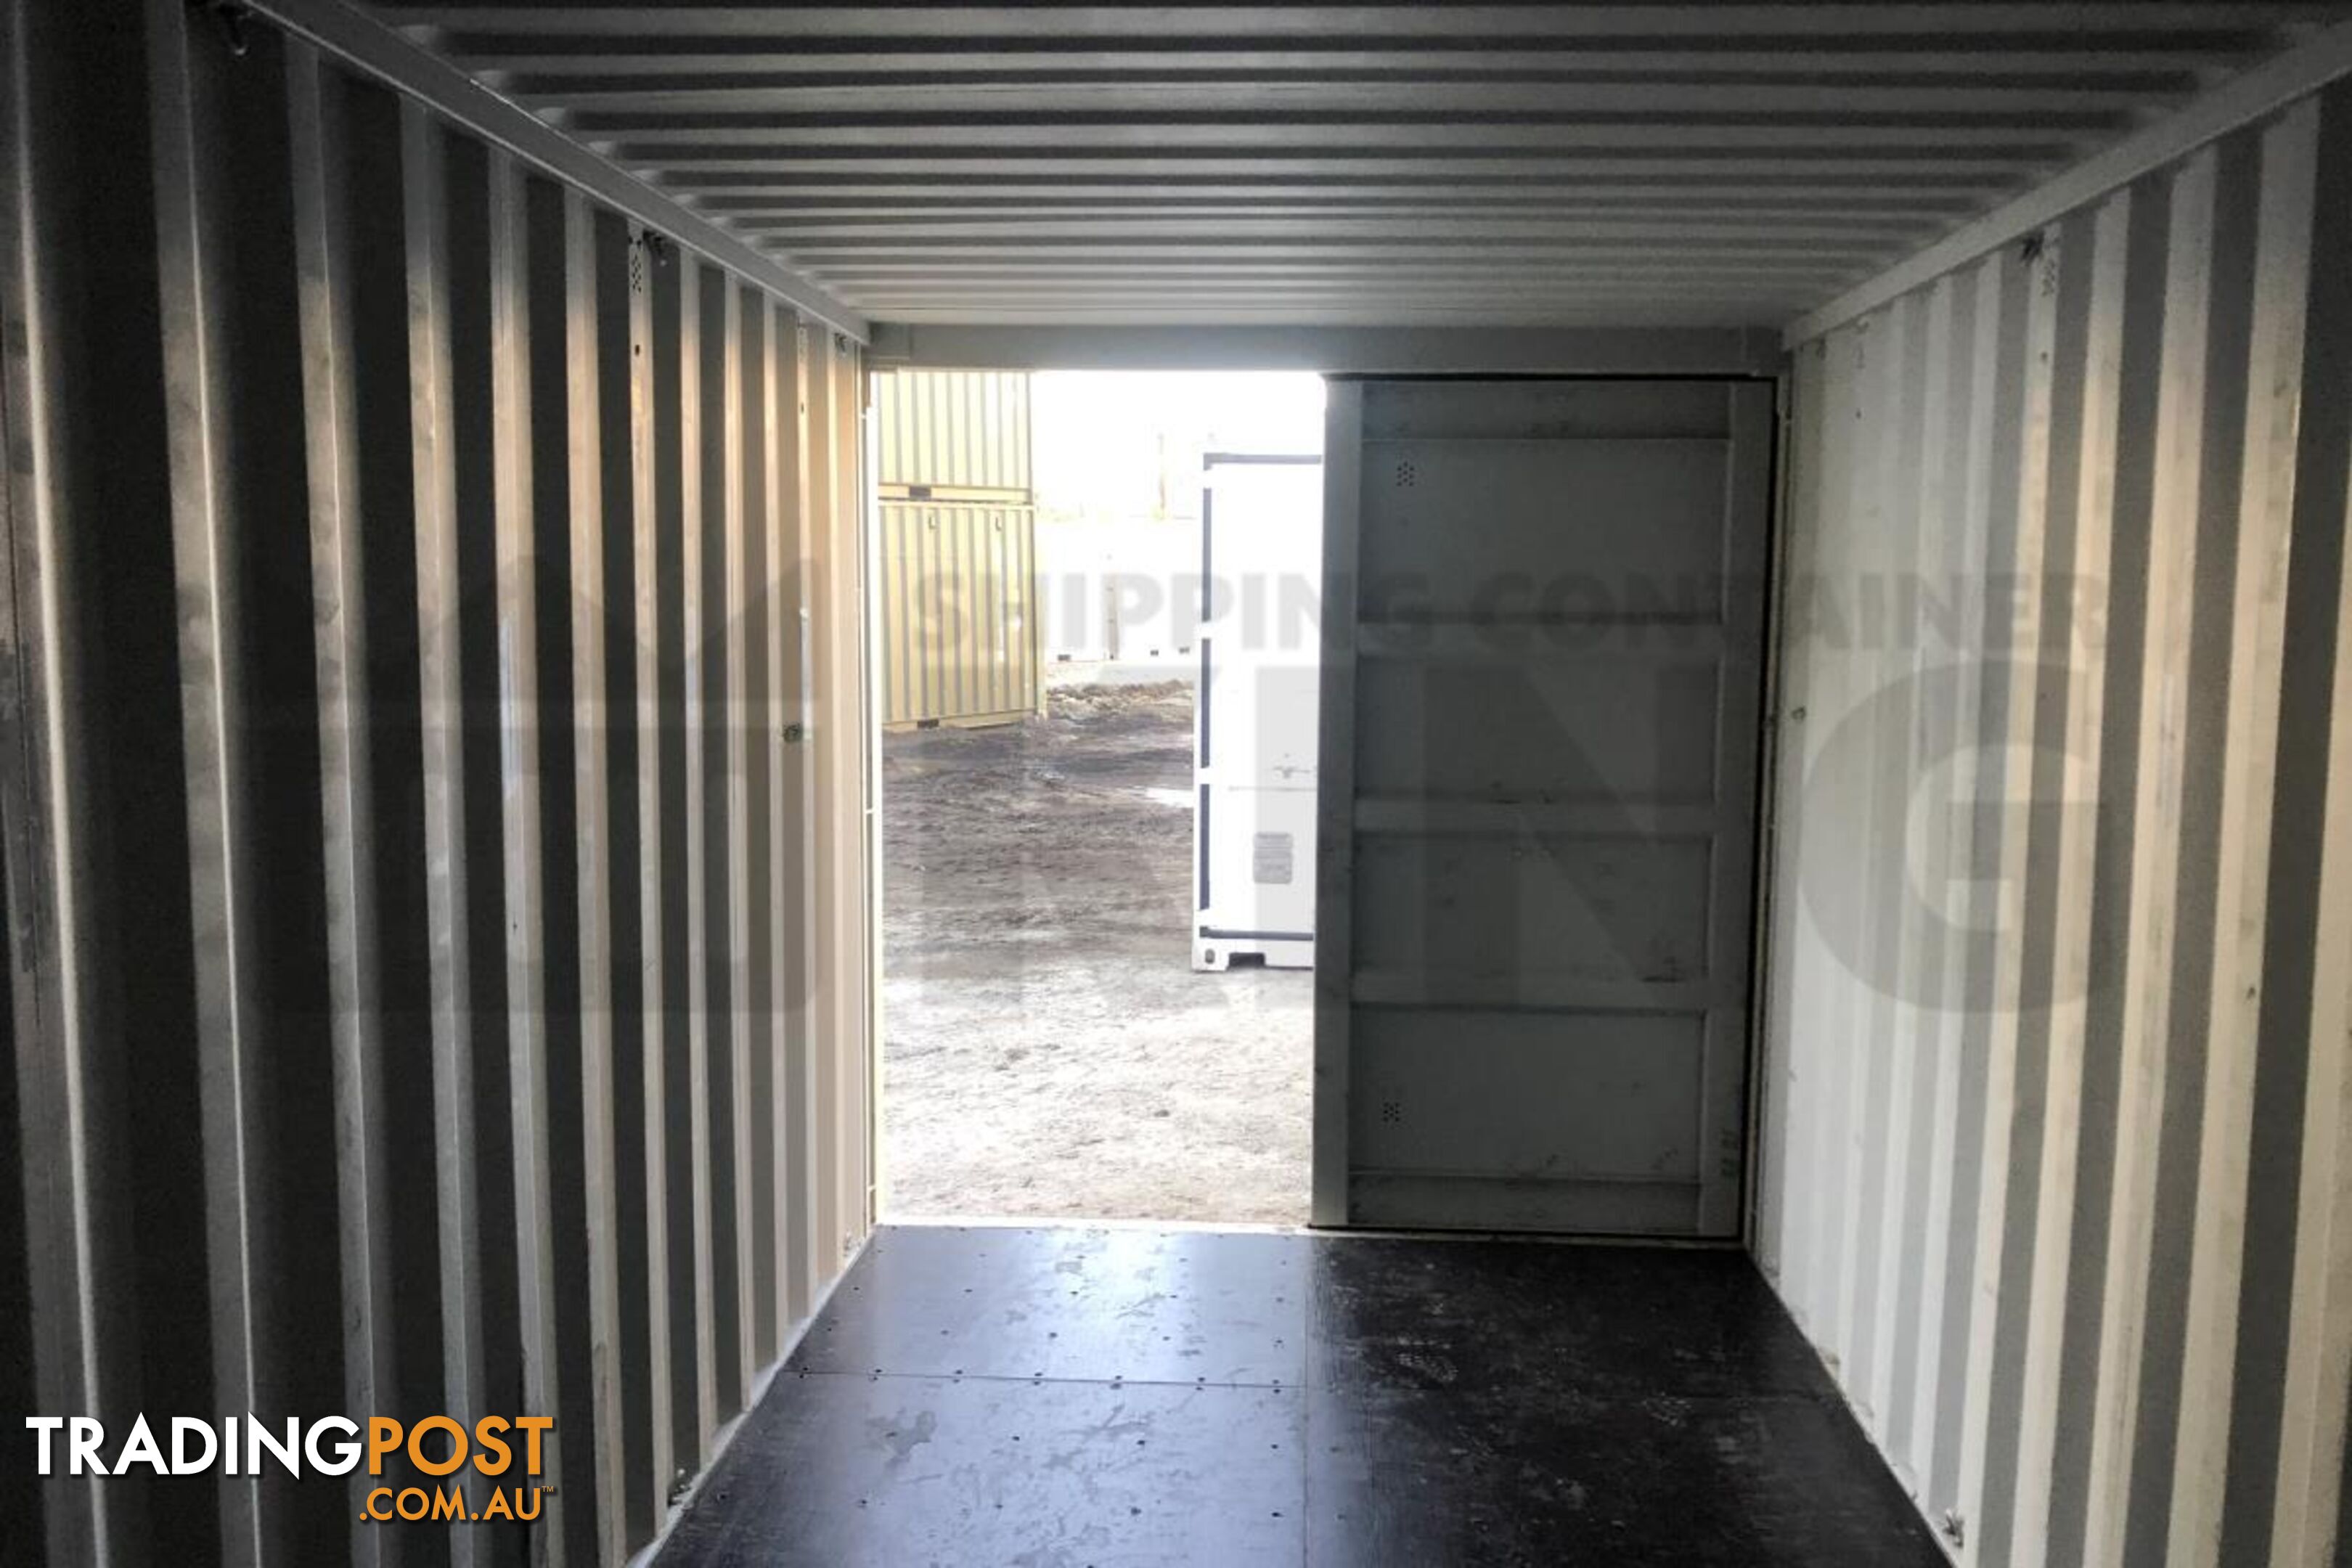 20' SHIPPING CONTAINER OFFICE "BUDGET BARRY" (BUDGET) - in Gympie